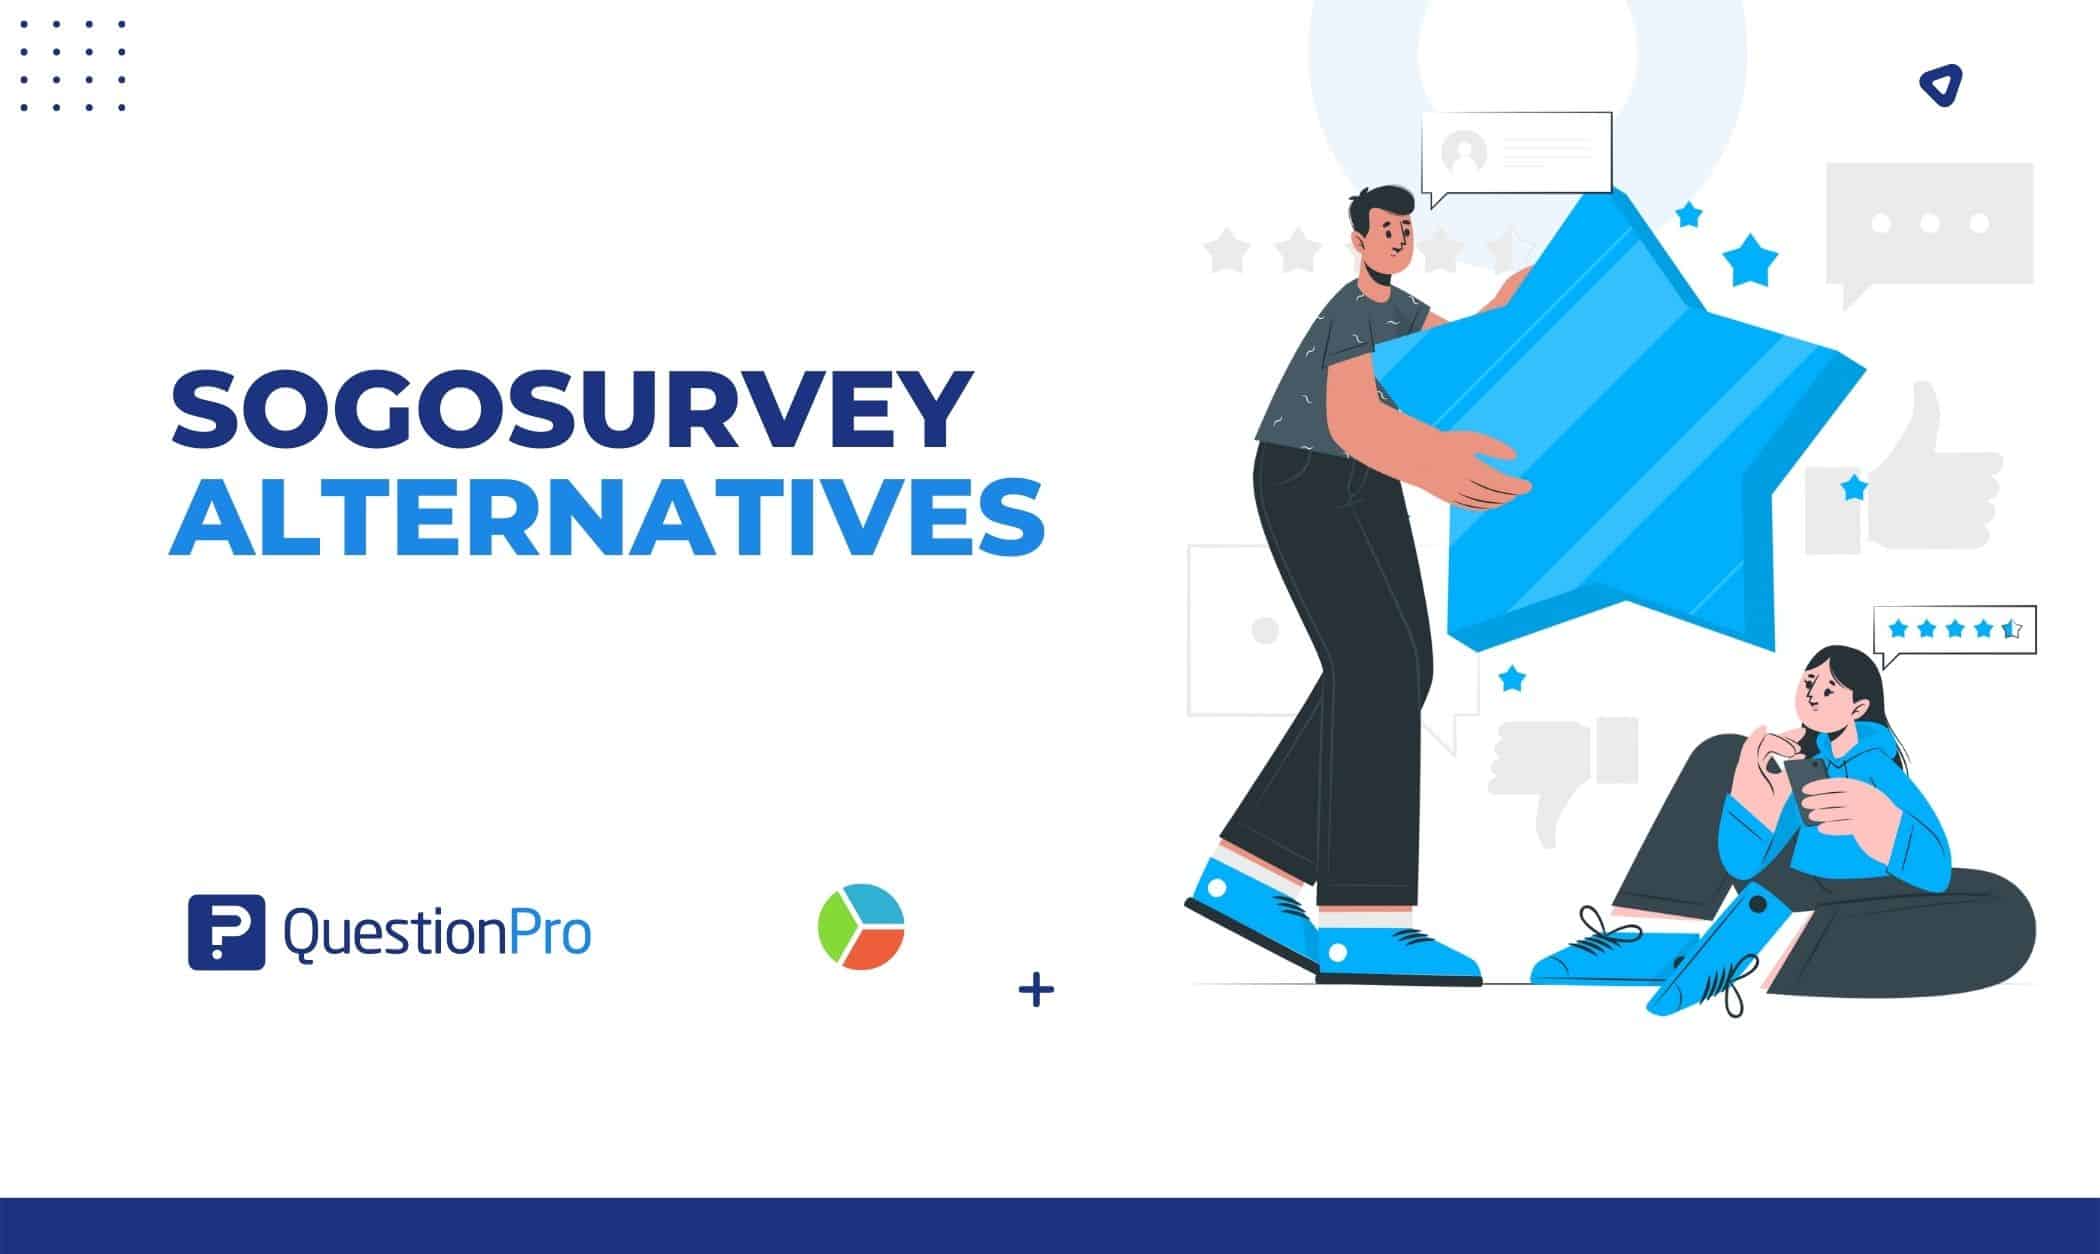 SoGoSurvey helps businesses create polls, forms, surveys, and quizzes. Choose the best SoGoSurvey alternatives for your business.